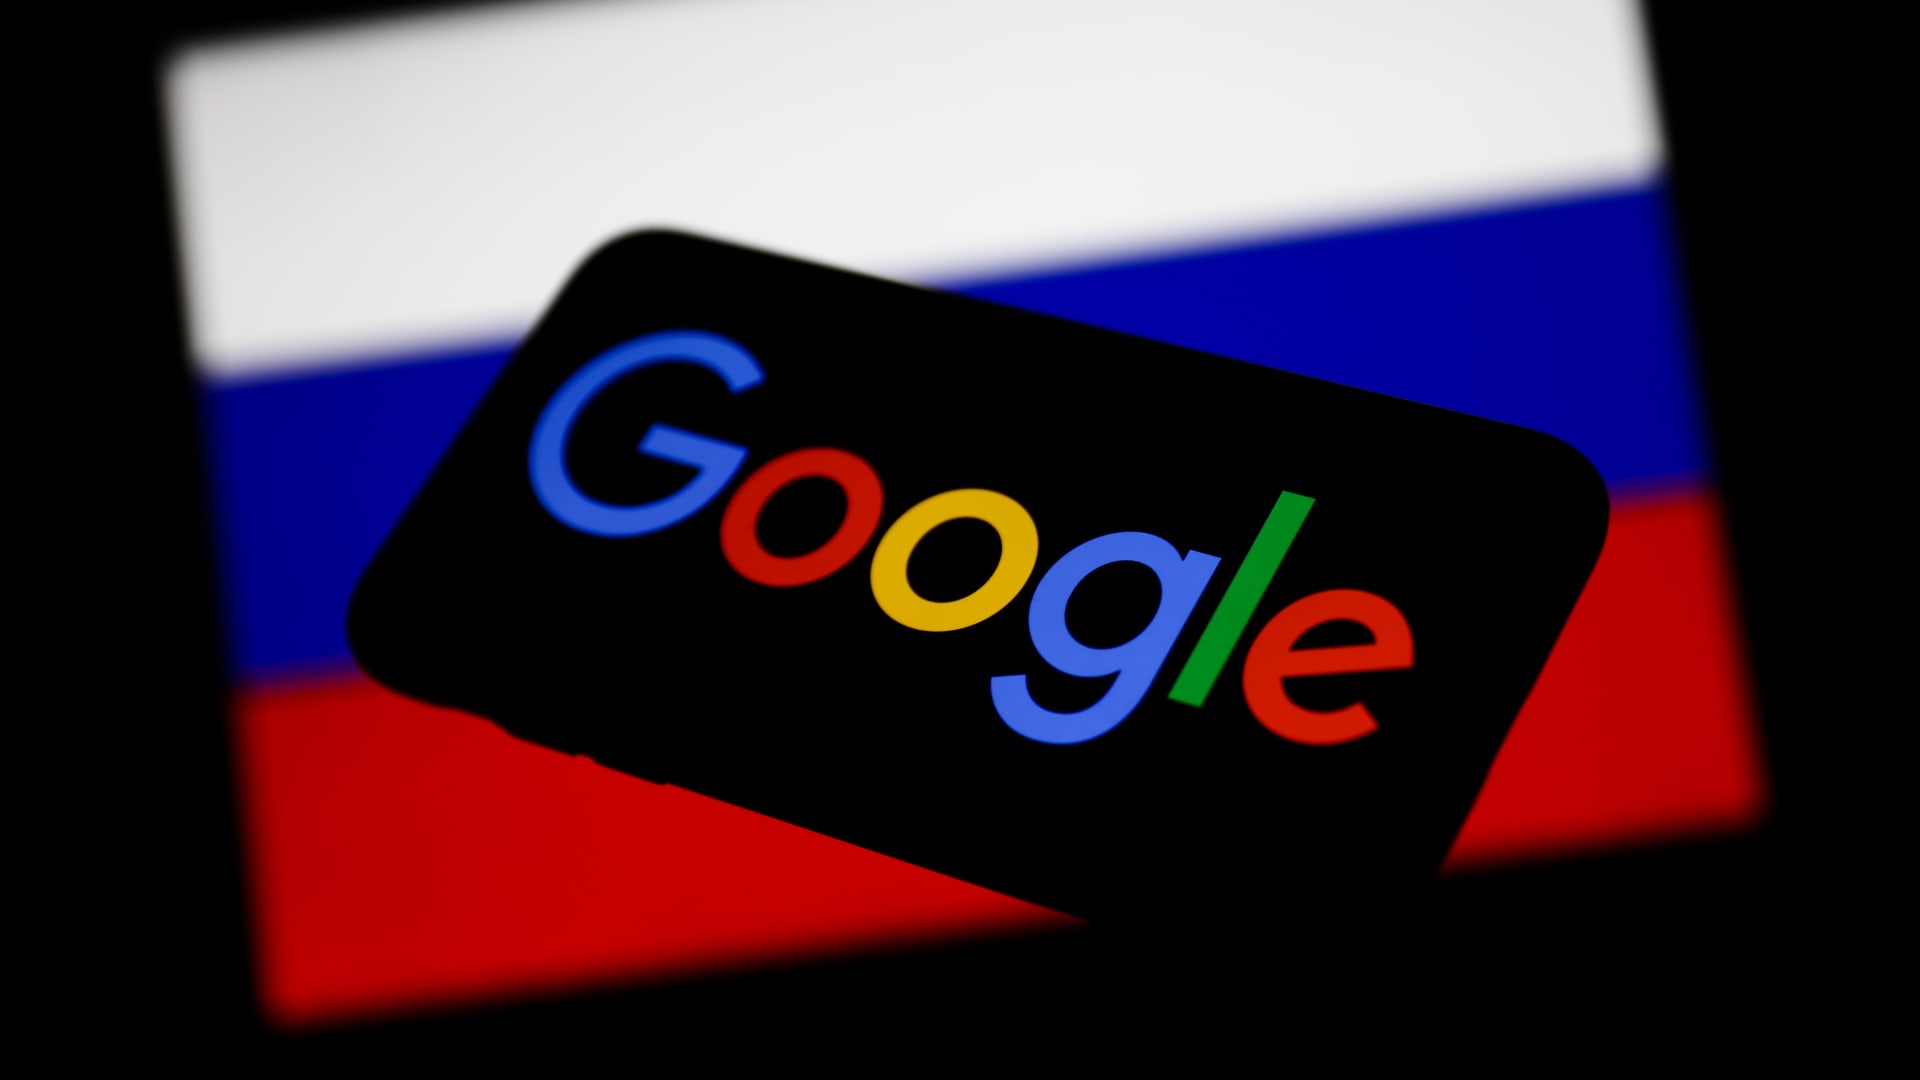 Google logo displayed on a phone screen and Russian flag displayed on a screen in the background are seen in this illustration photo on March 1, 2022. Google's Russian subsidiary is planning to file for bankruptcy after authorities seized its bank account, said a Google spokesperson cited by Reuters, but free services like search and YouTube will remain available for Russian users.